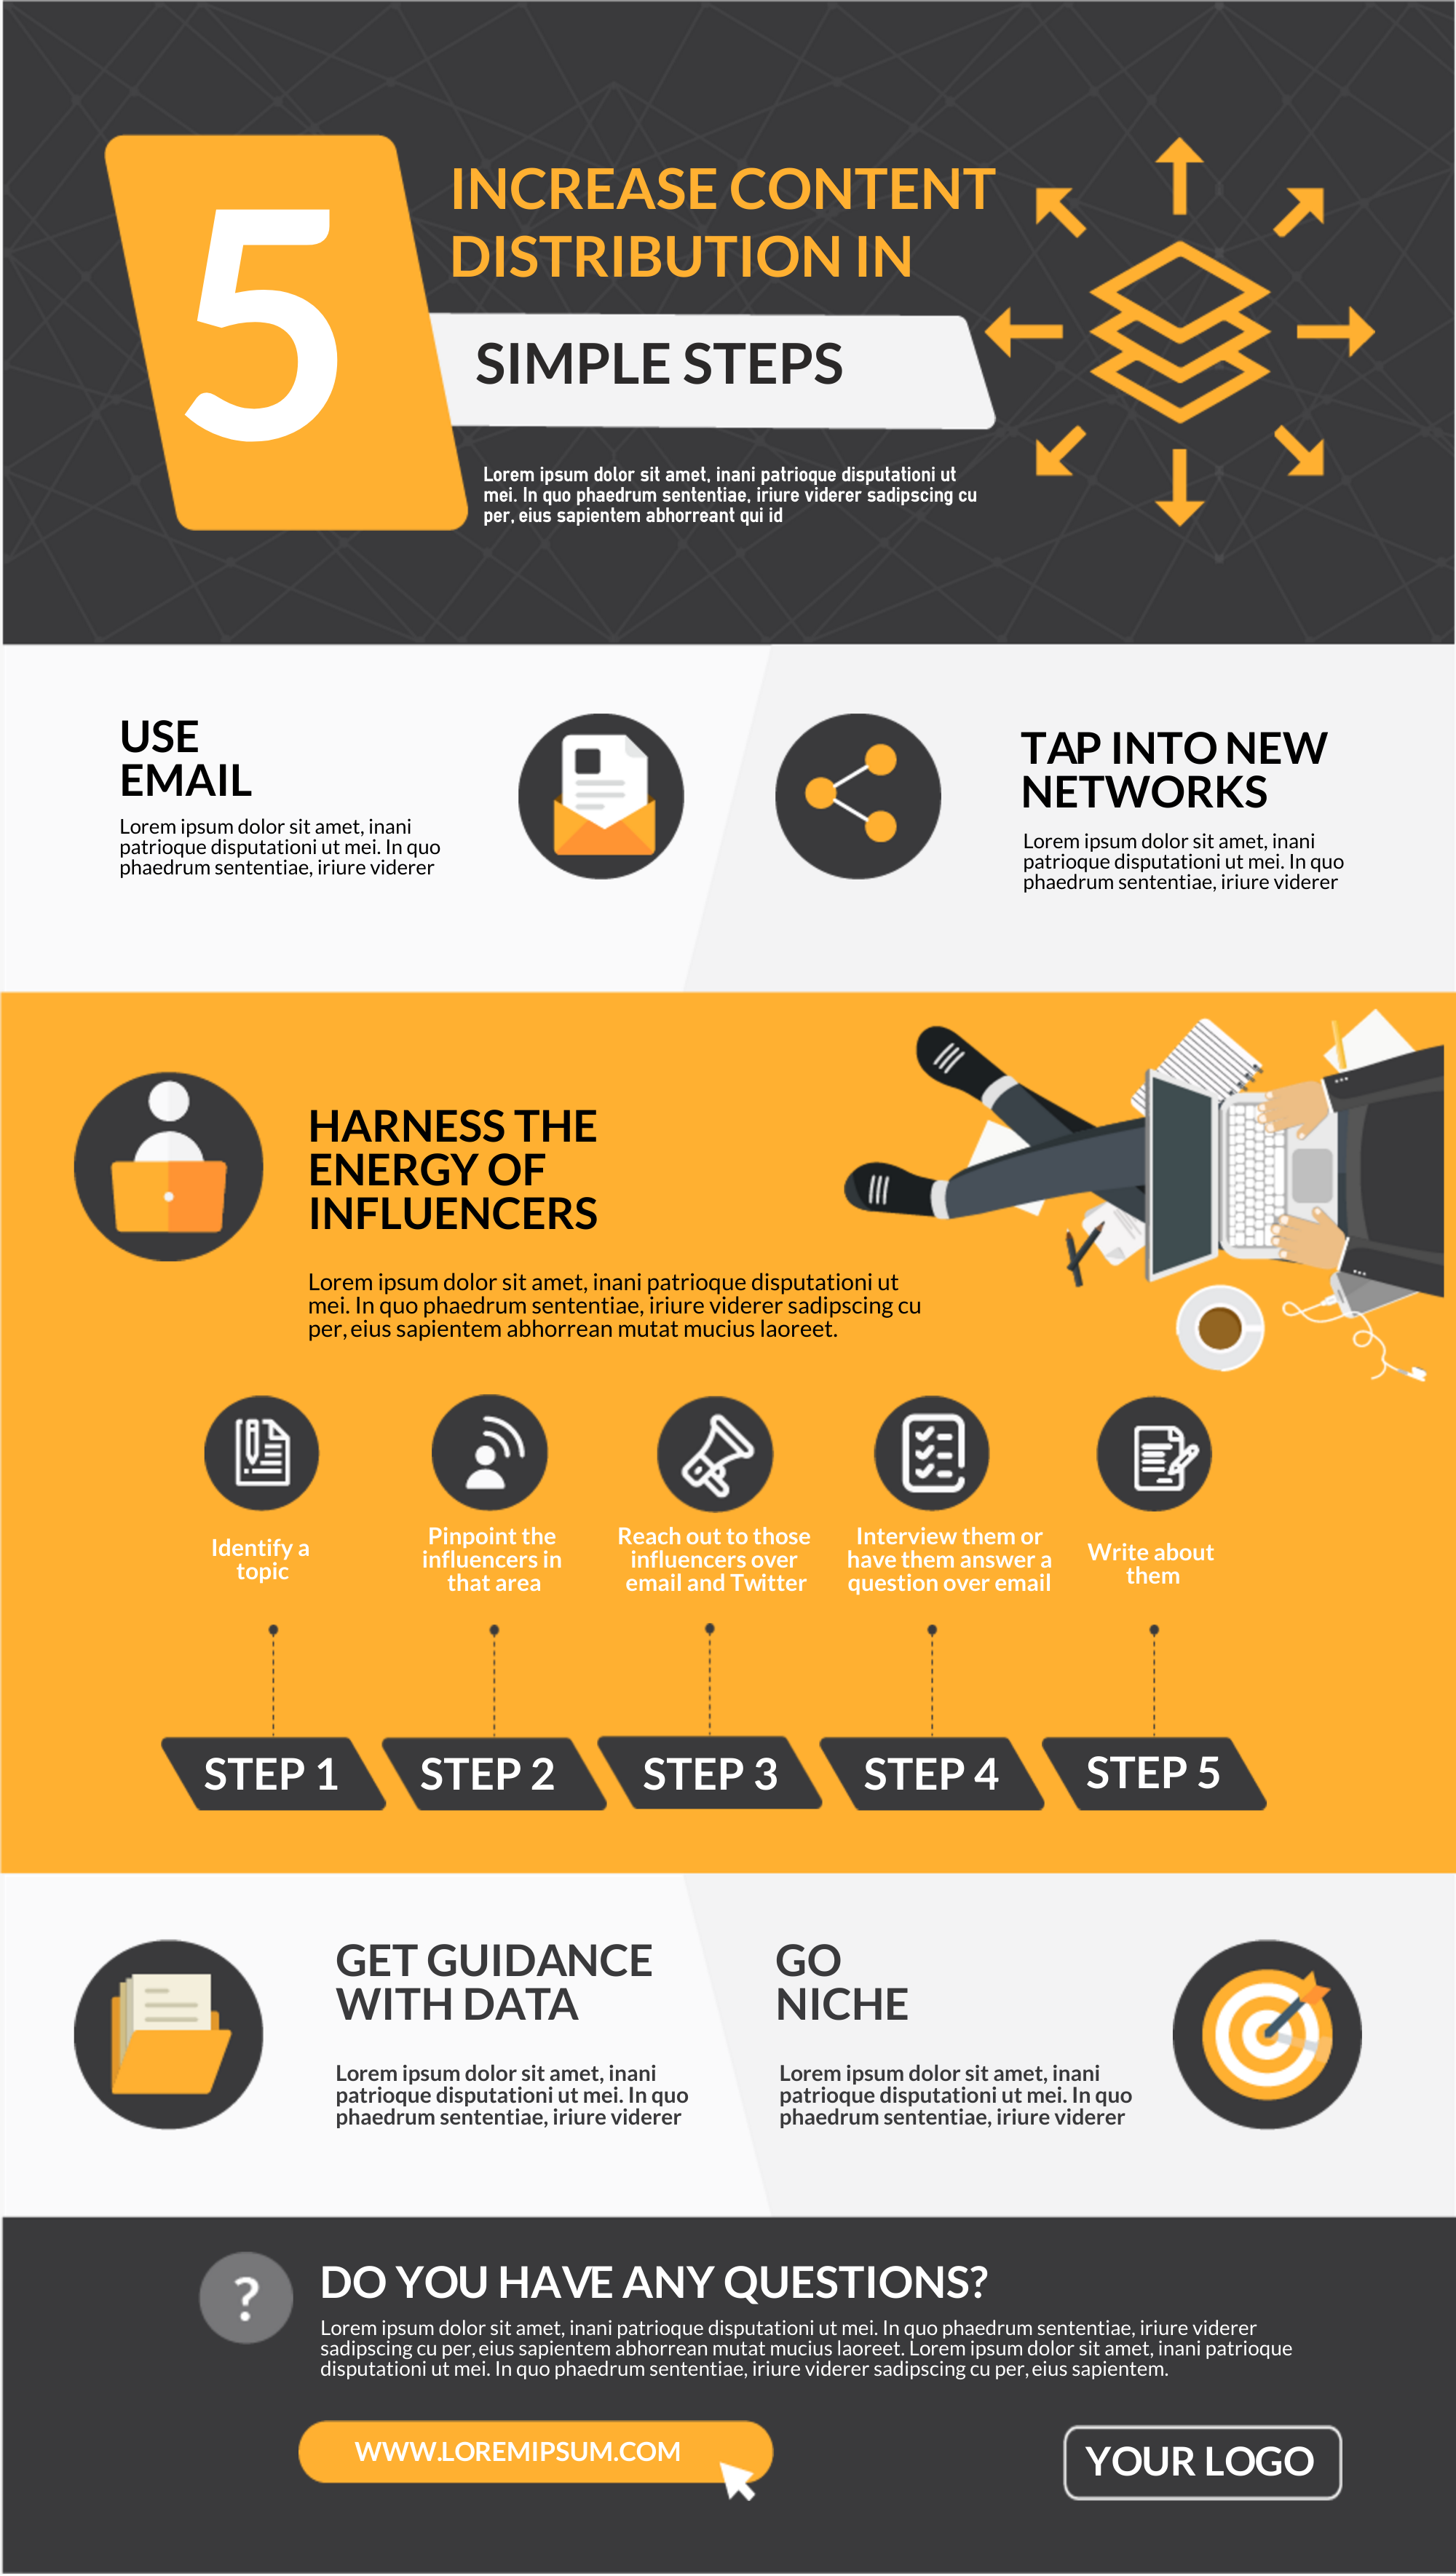 9+ Business Infographic Examples & Ideas  Daily Design Inspiration #23